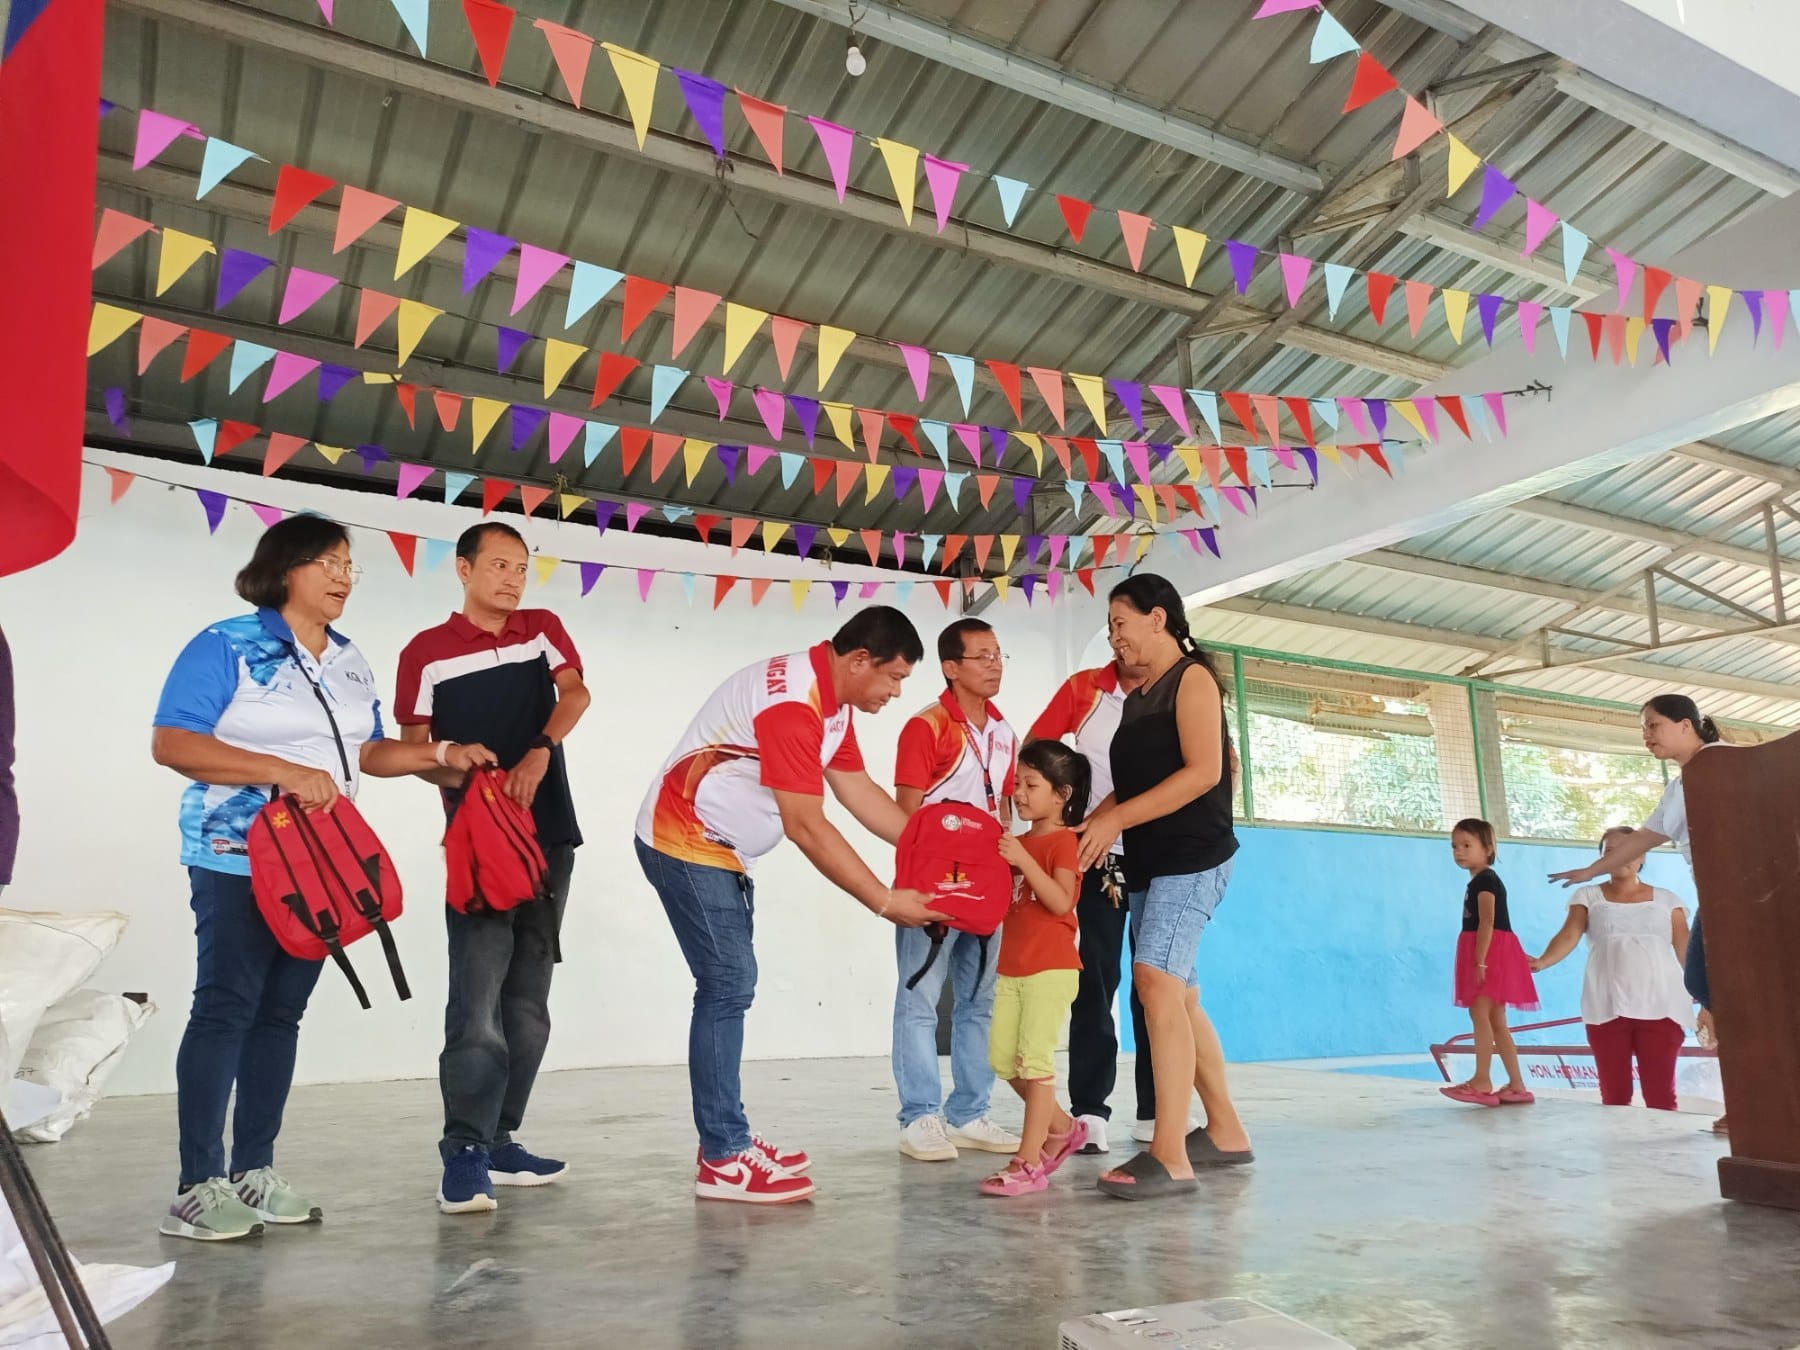 Distribution of School Bags and Supplies, Banjo East Elementary School